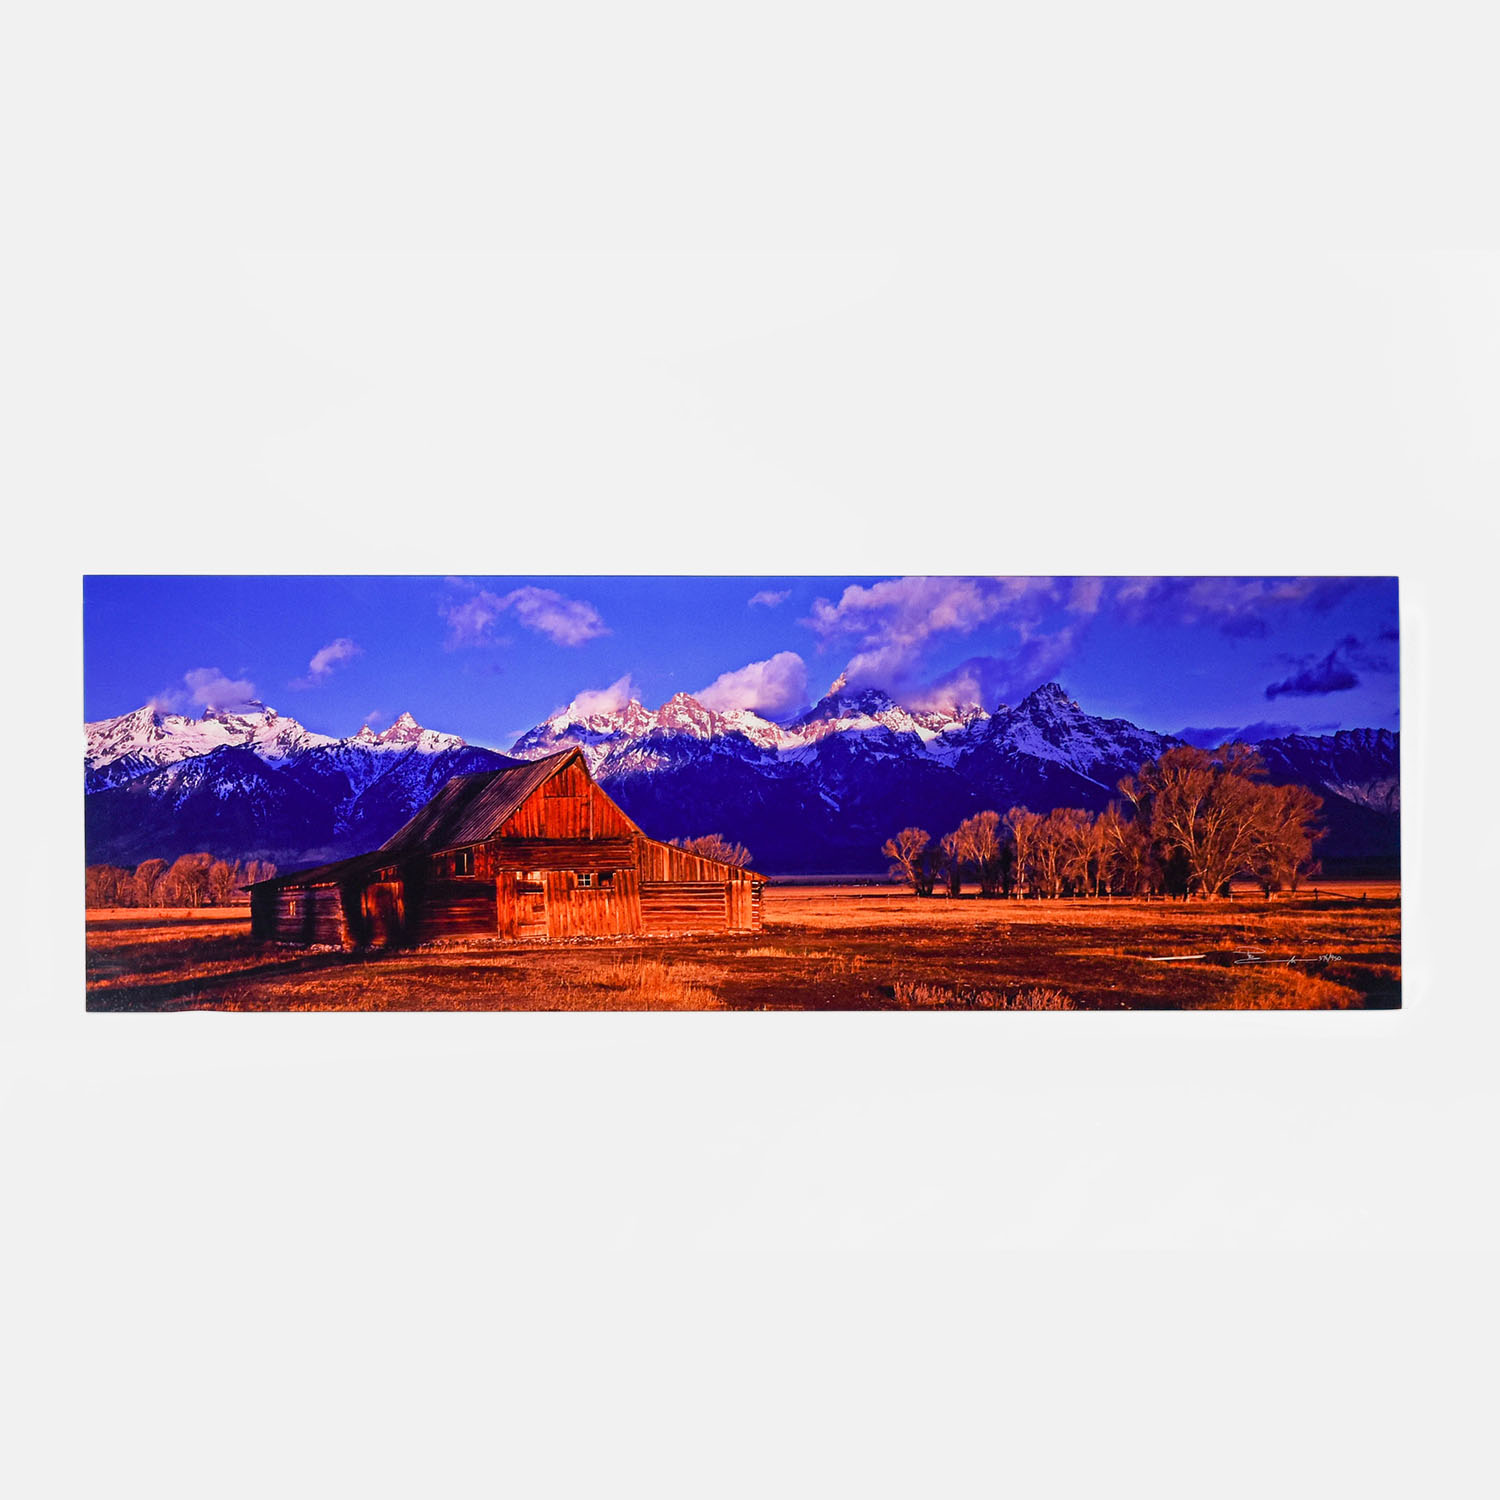 Photograph on Acrylic of Mountain House Signed by Peter Lik 376/950